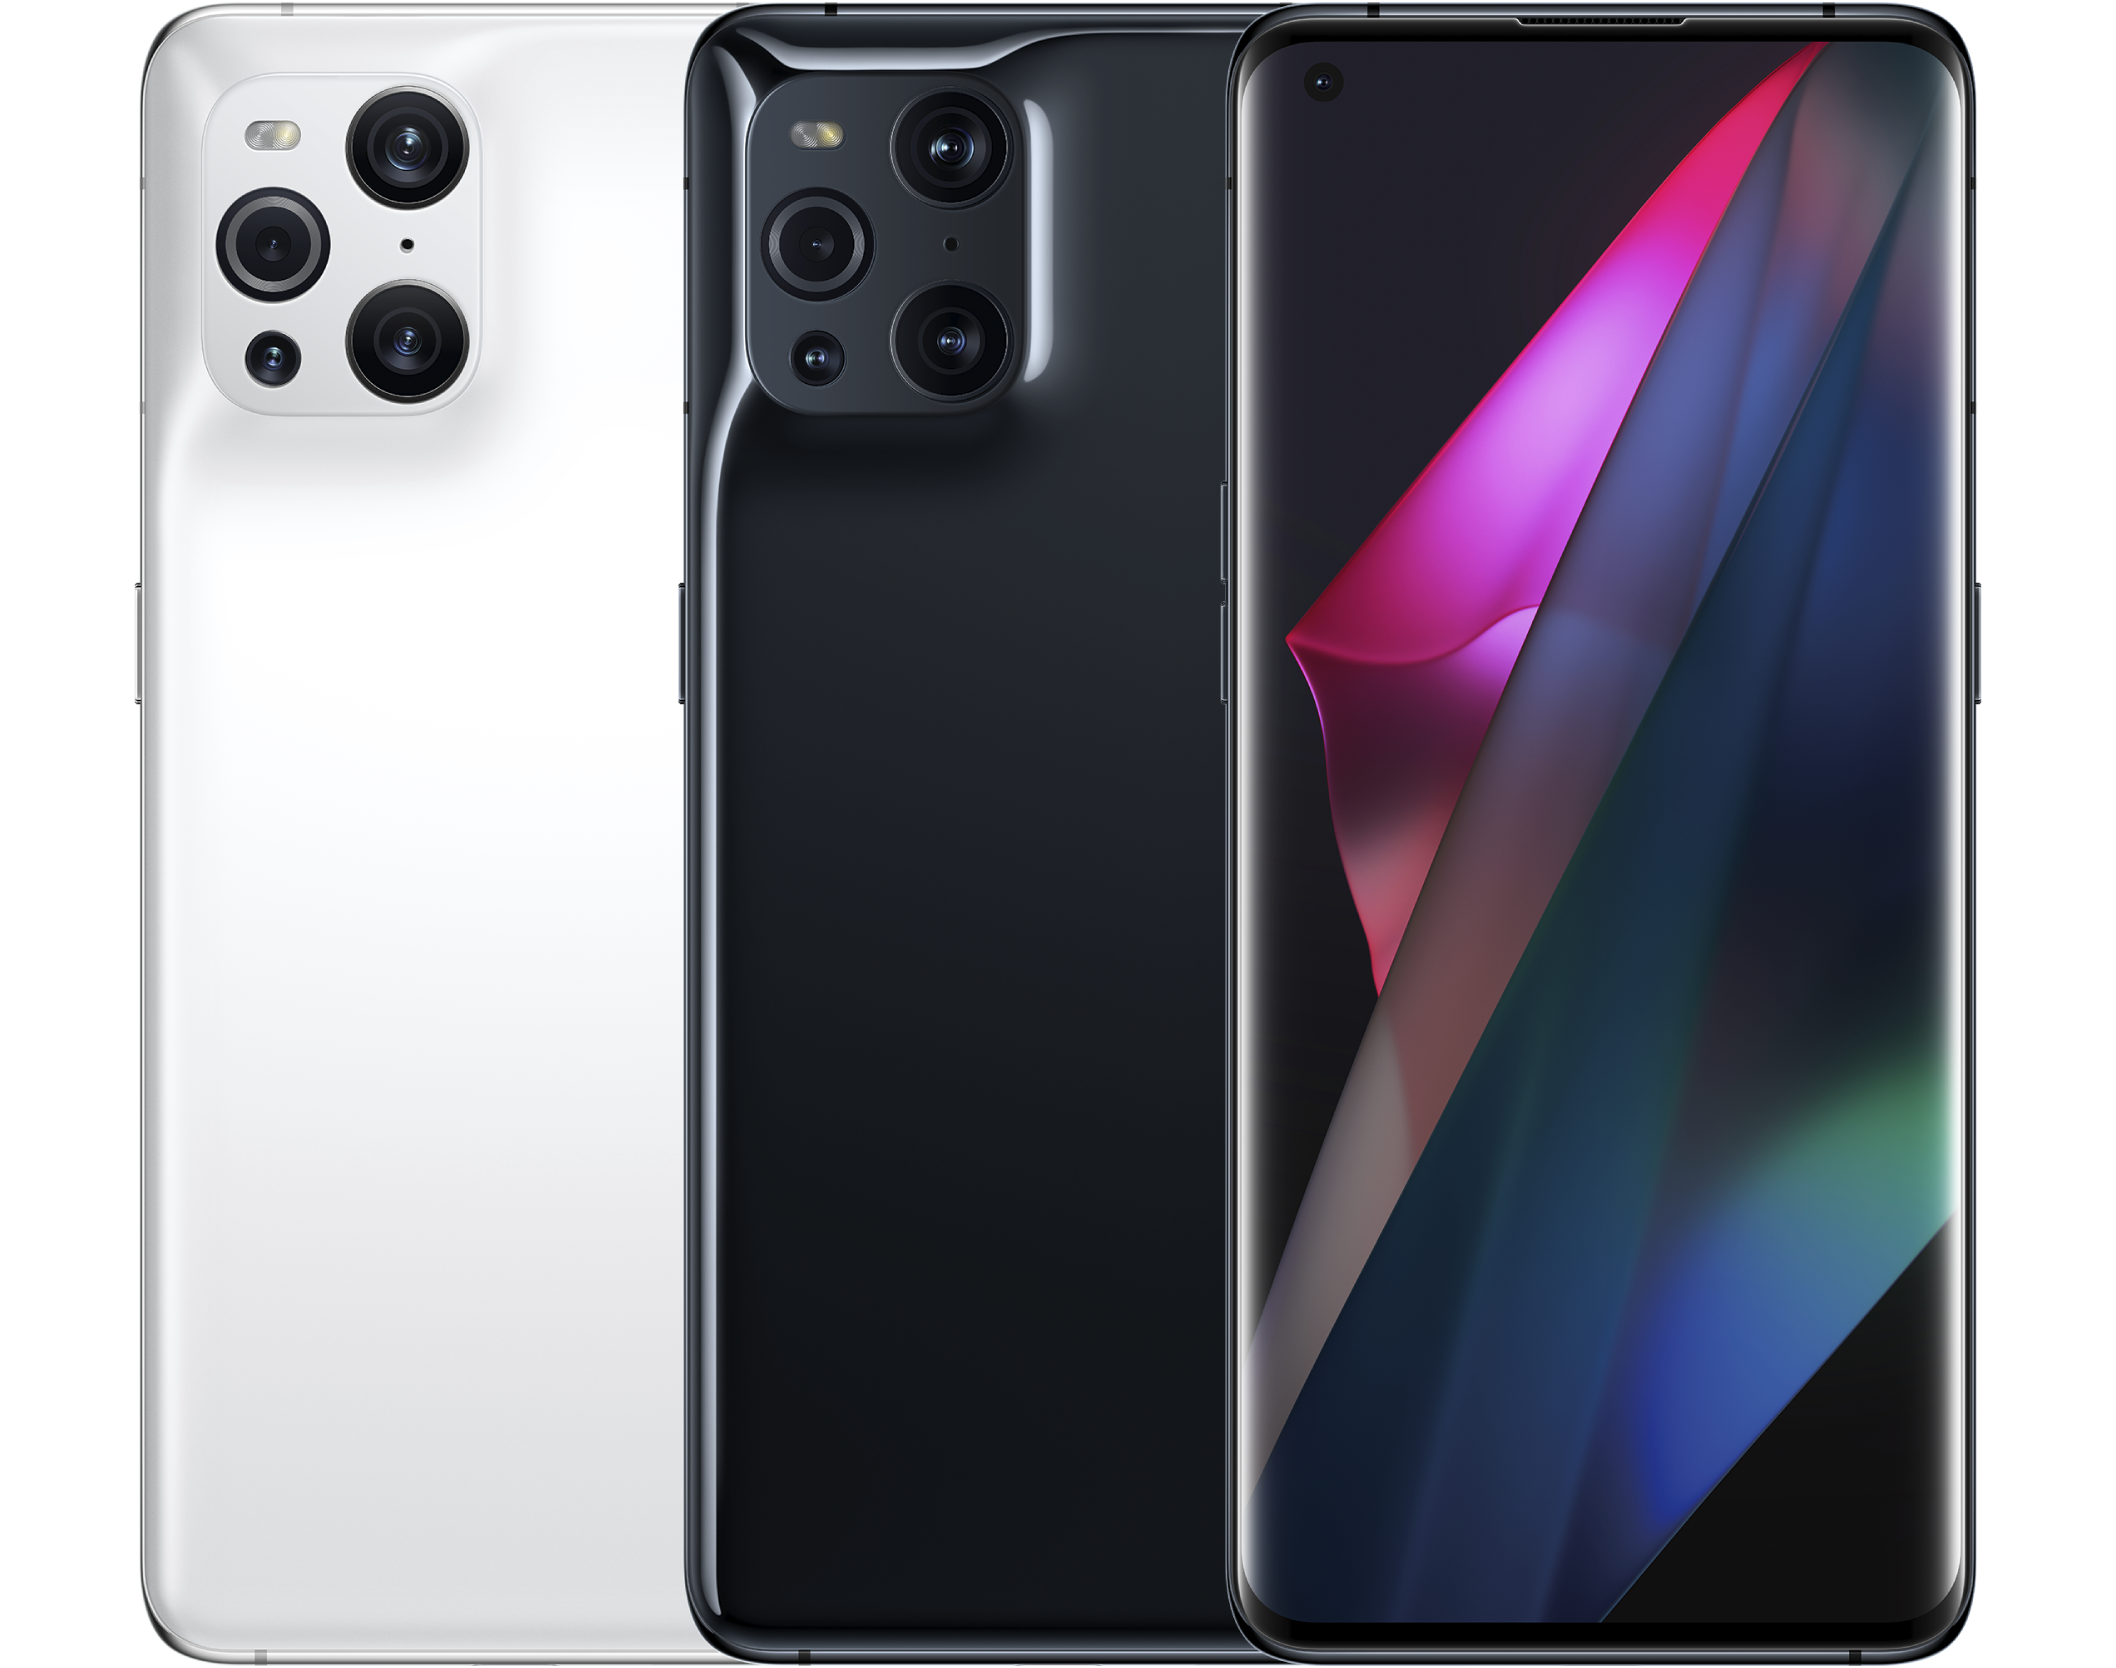 oppo find x 日本版